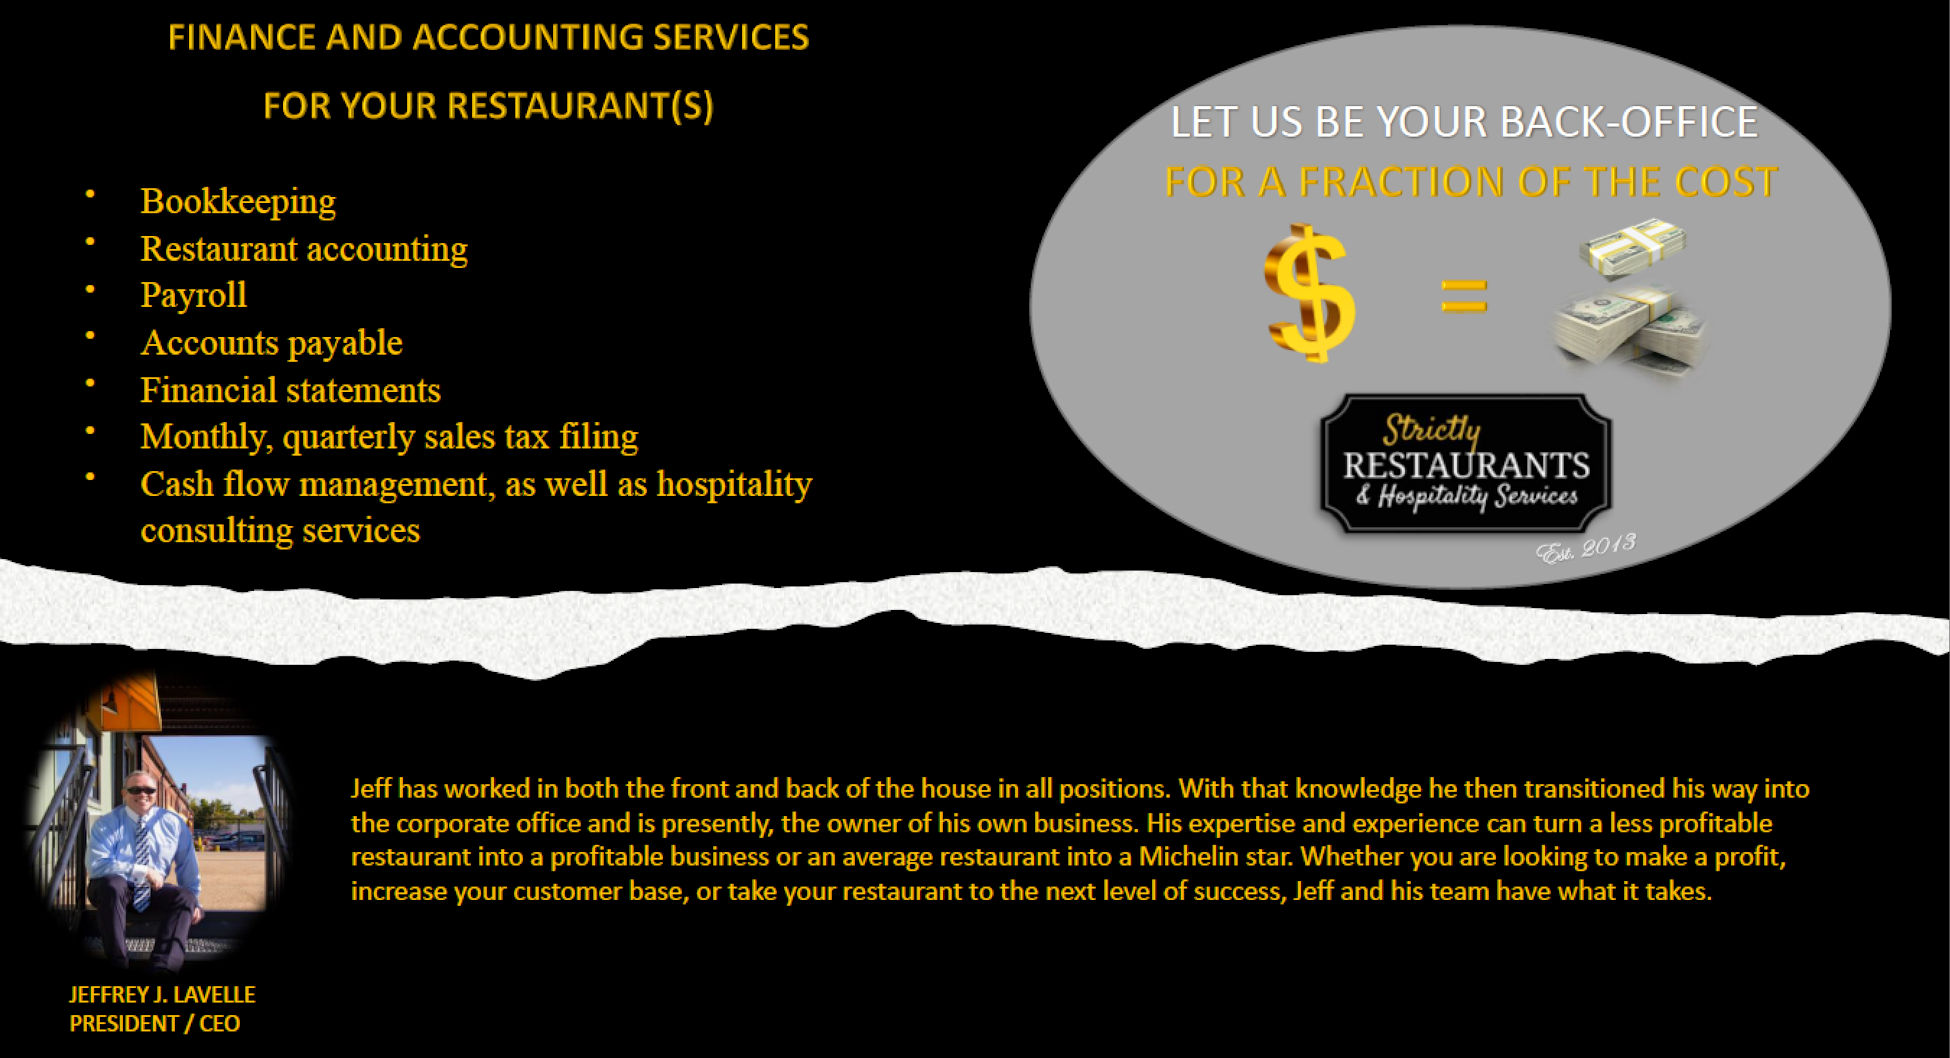 Restaurant Finance and Business Operational Services, by Strictly Restaurants